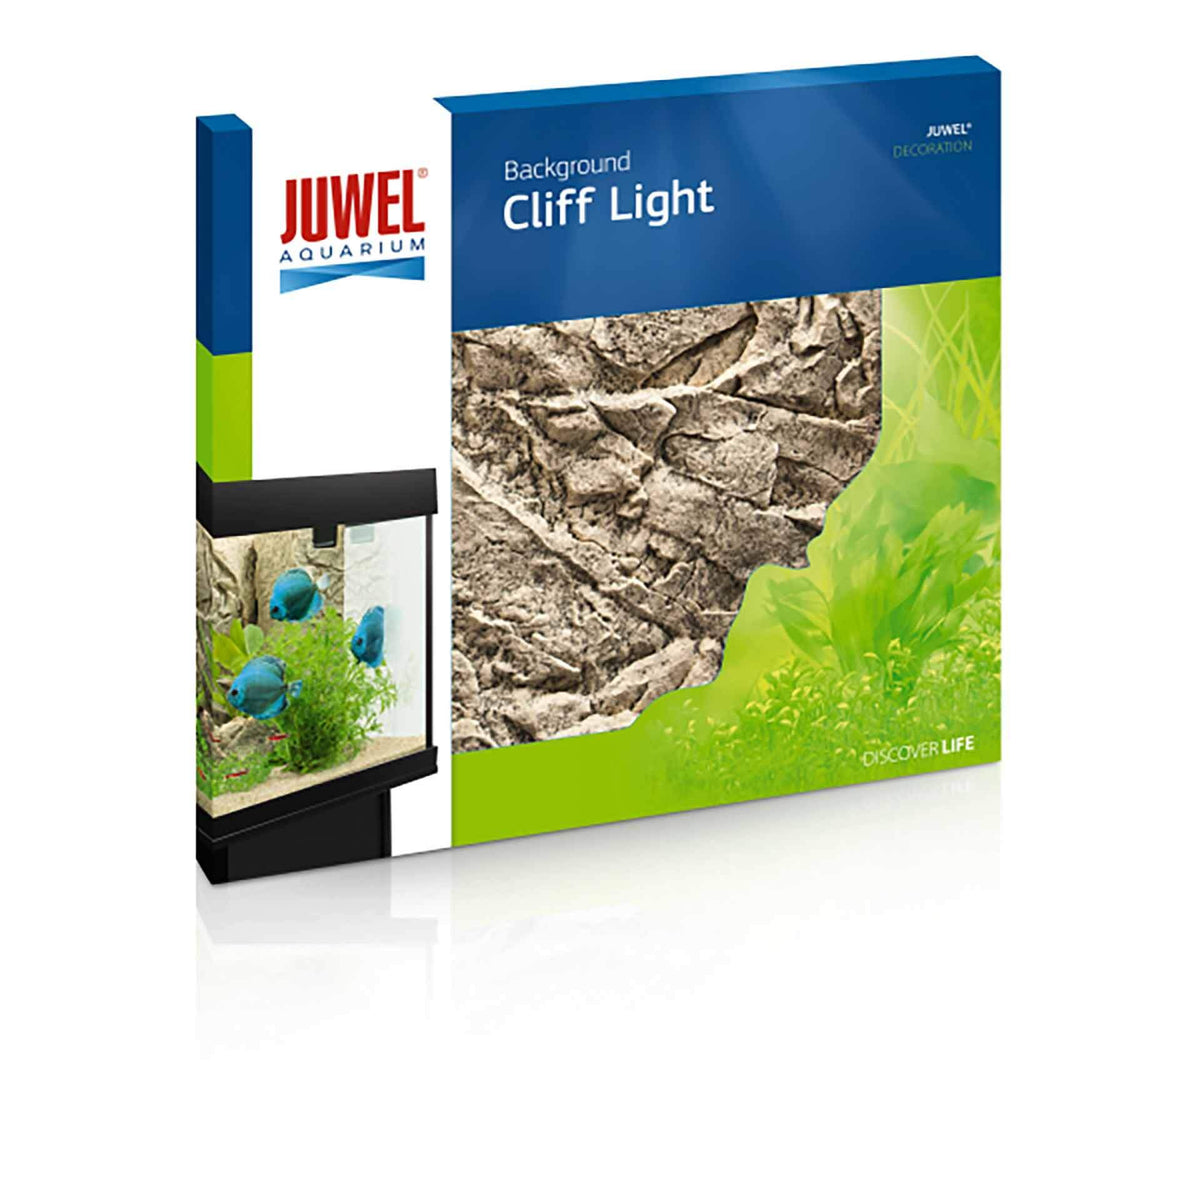 Juwel Background Cliff Light - 60x55cm - In store pickup only